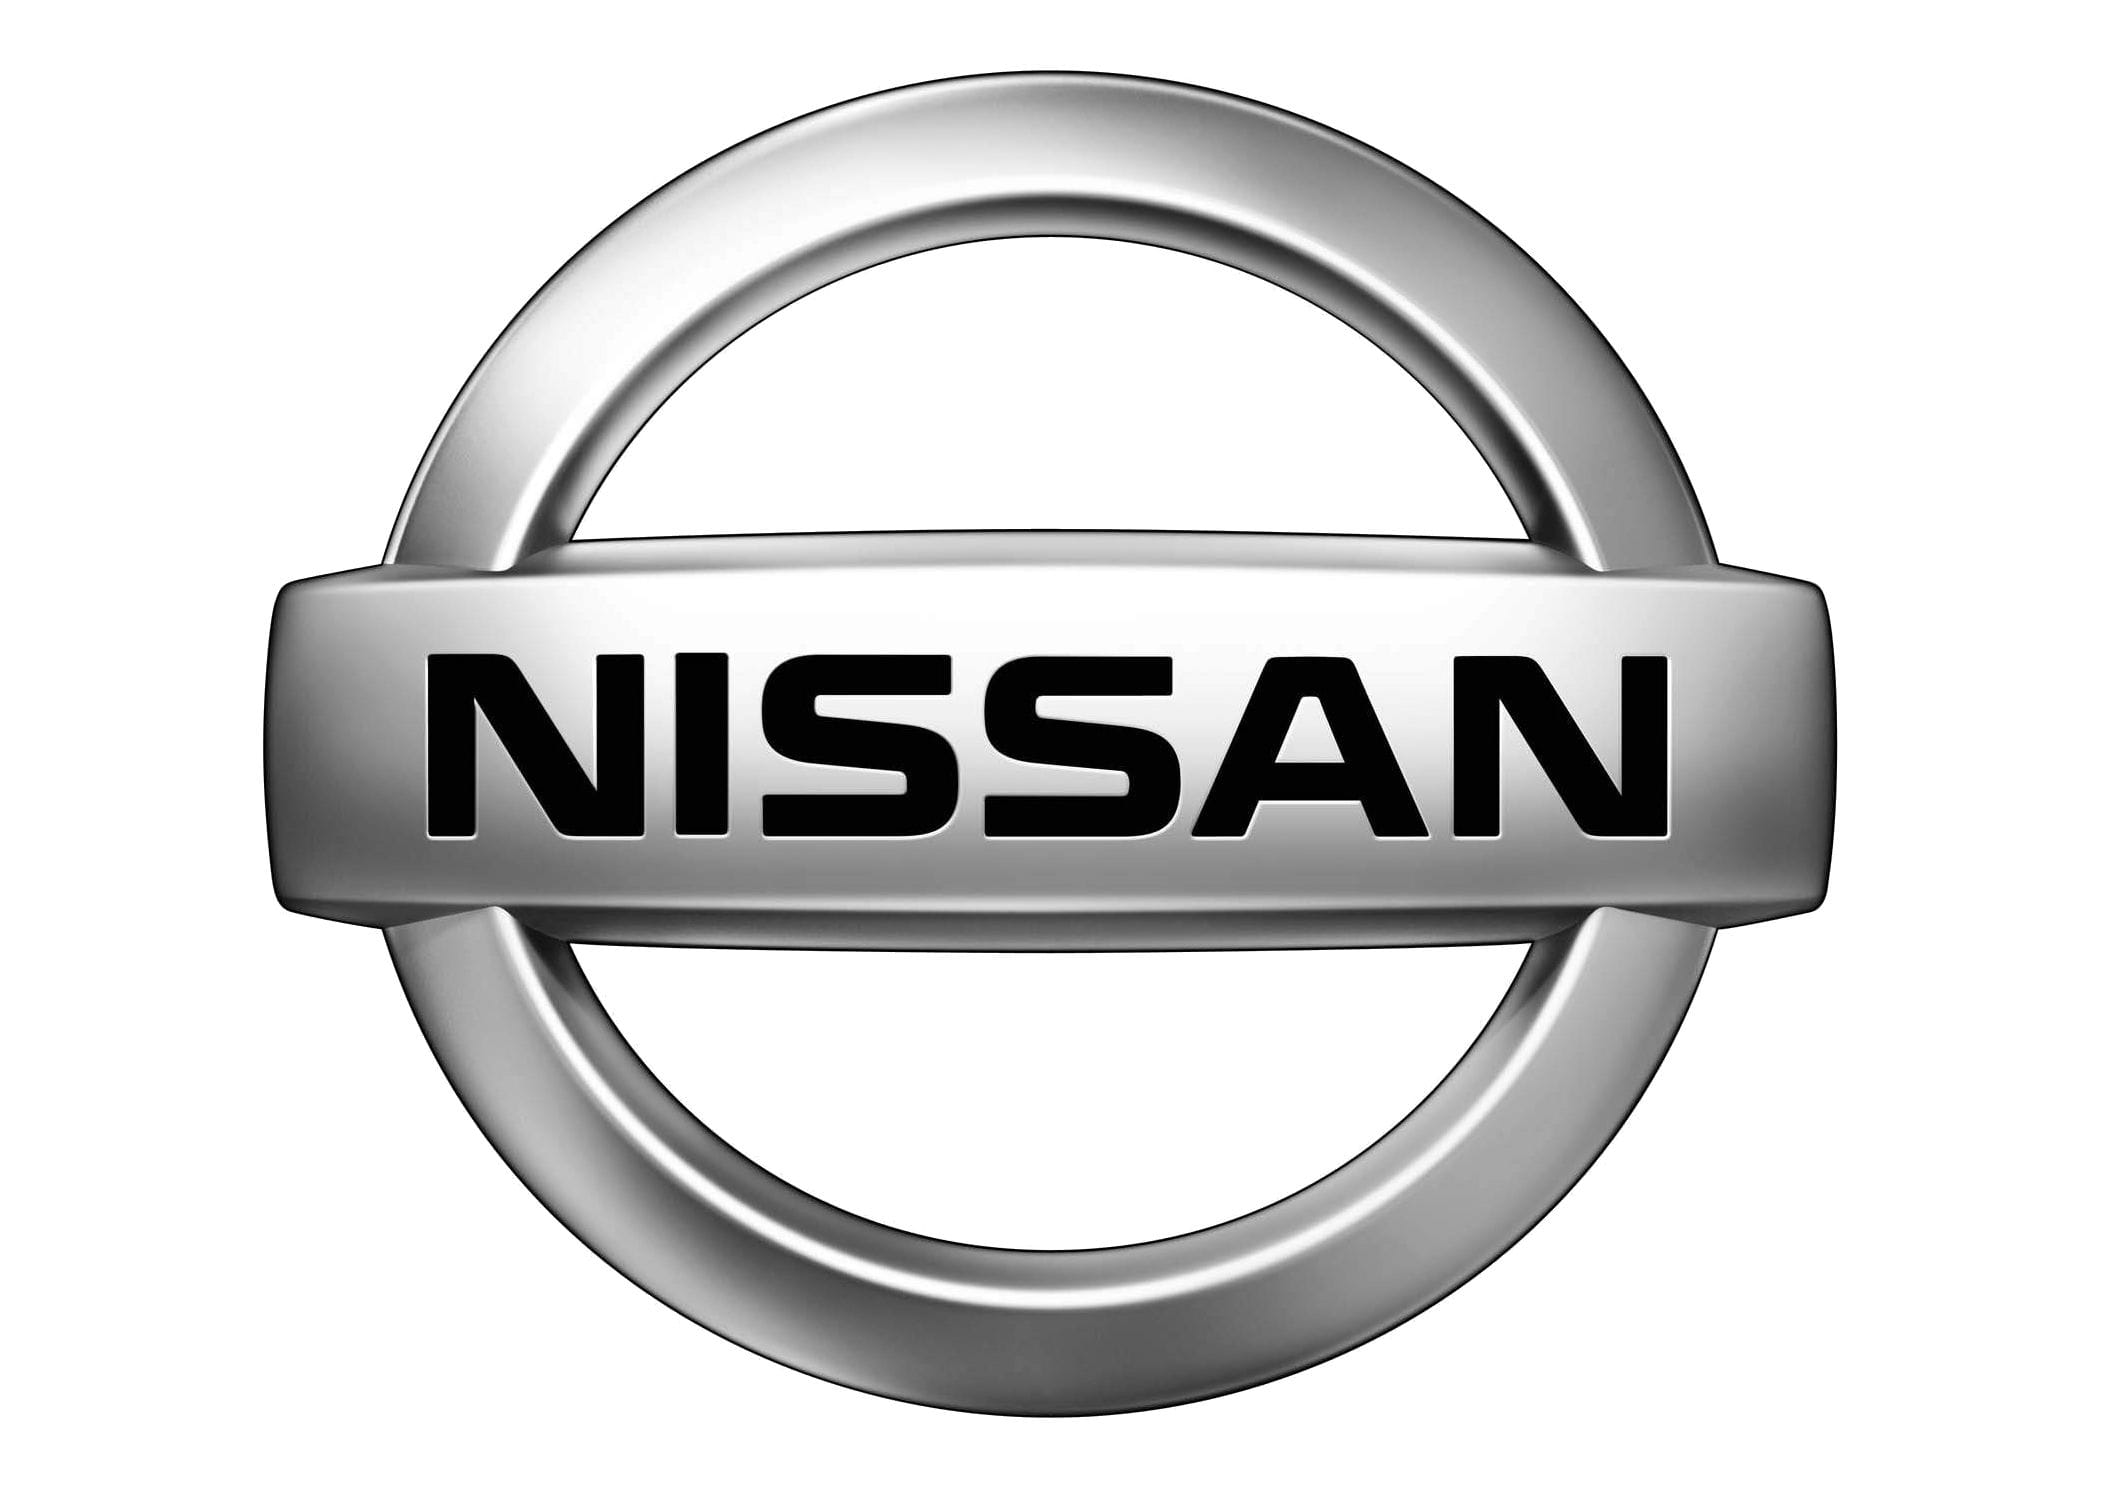 Nissan Auto Body and Collision Repair